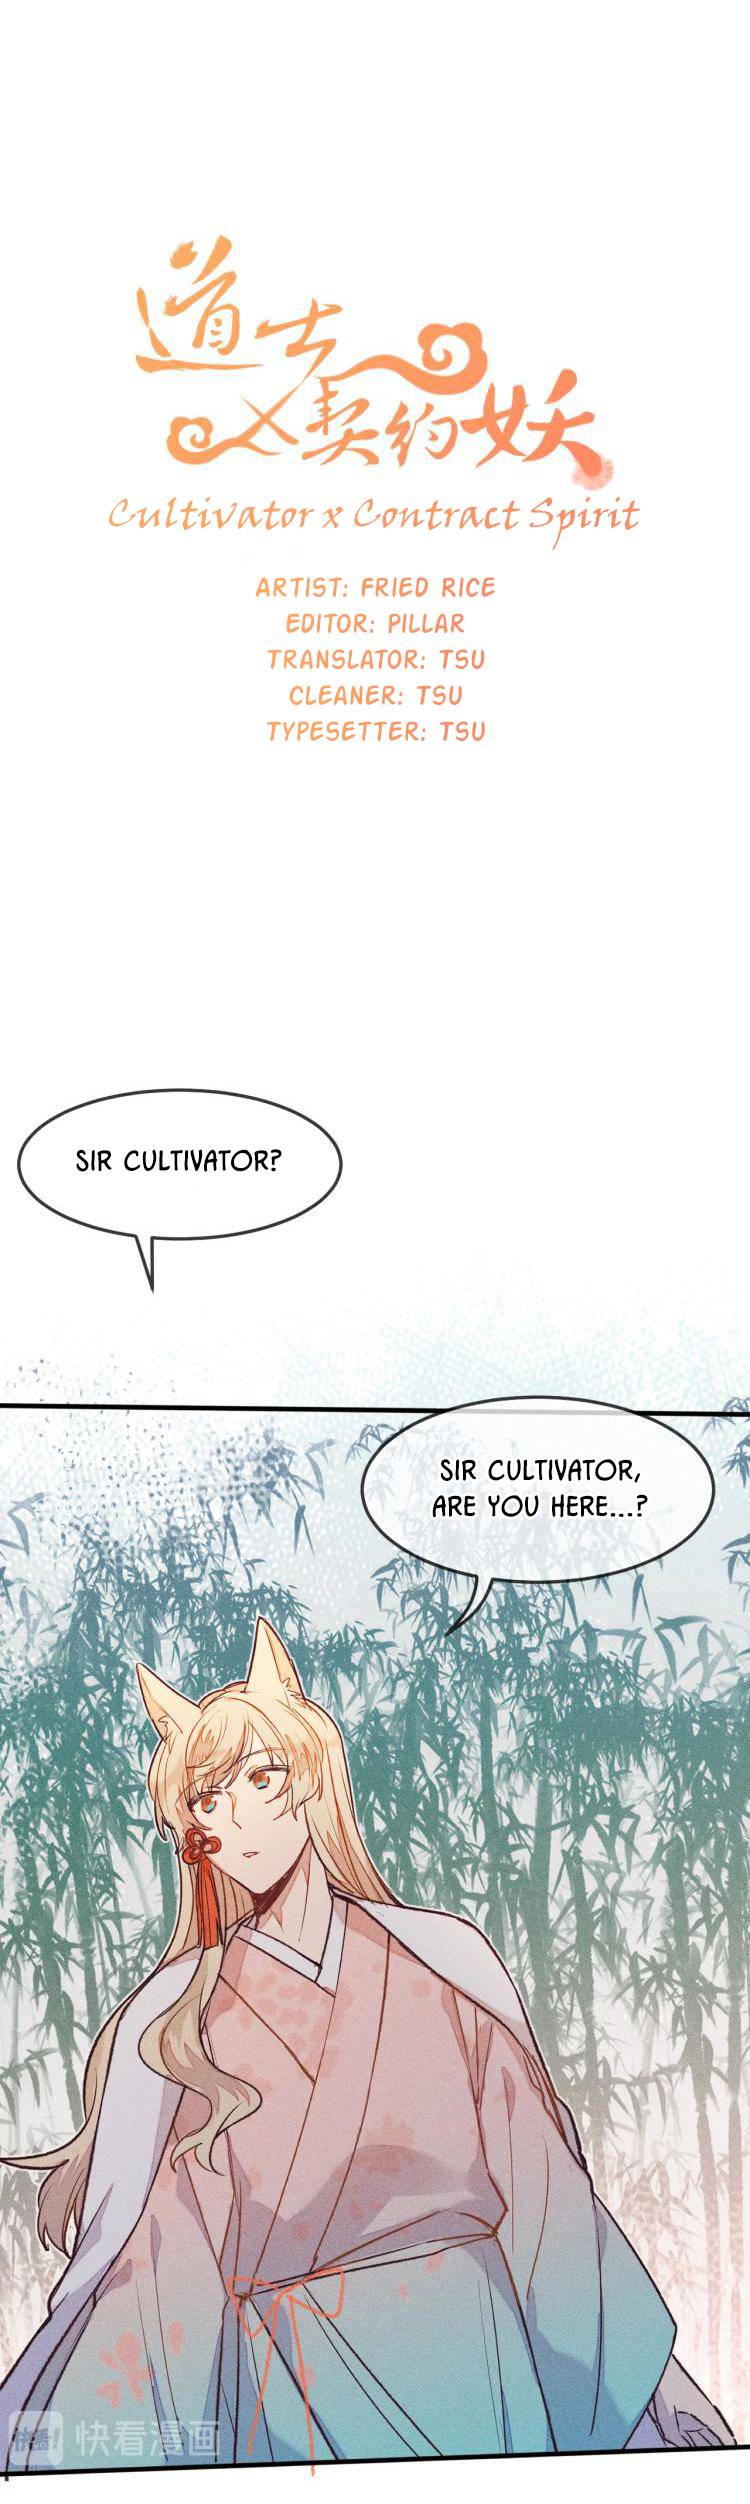 Cultivator X Contract Spirit - Page 2